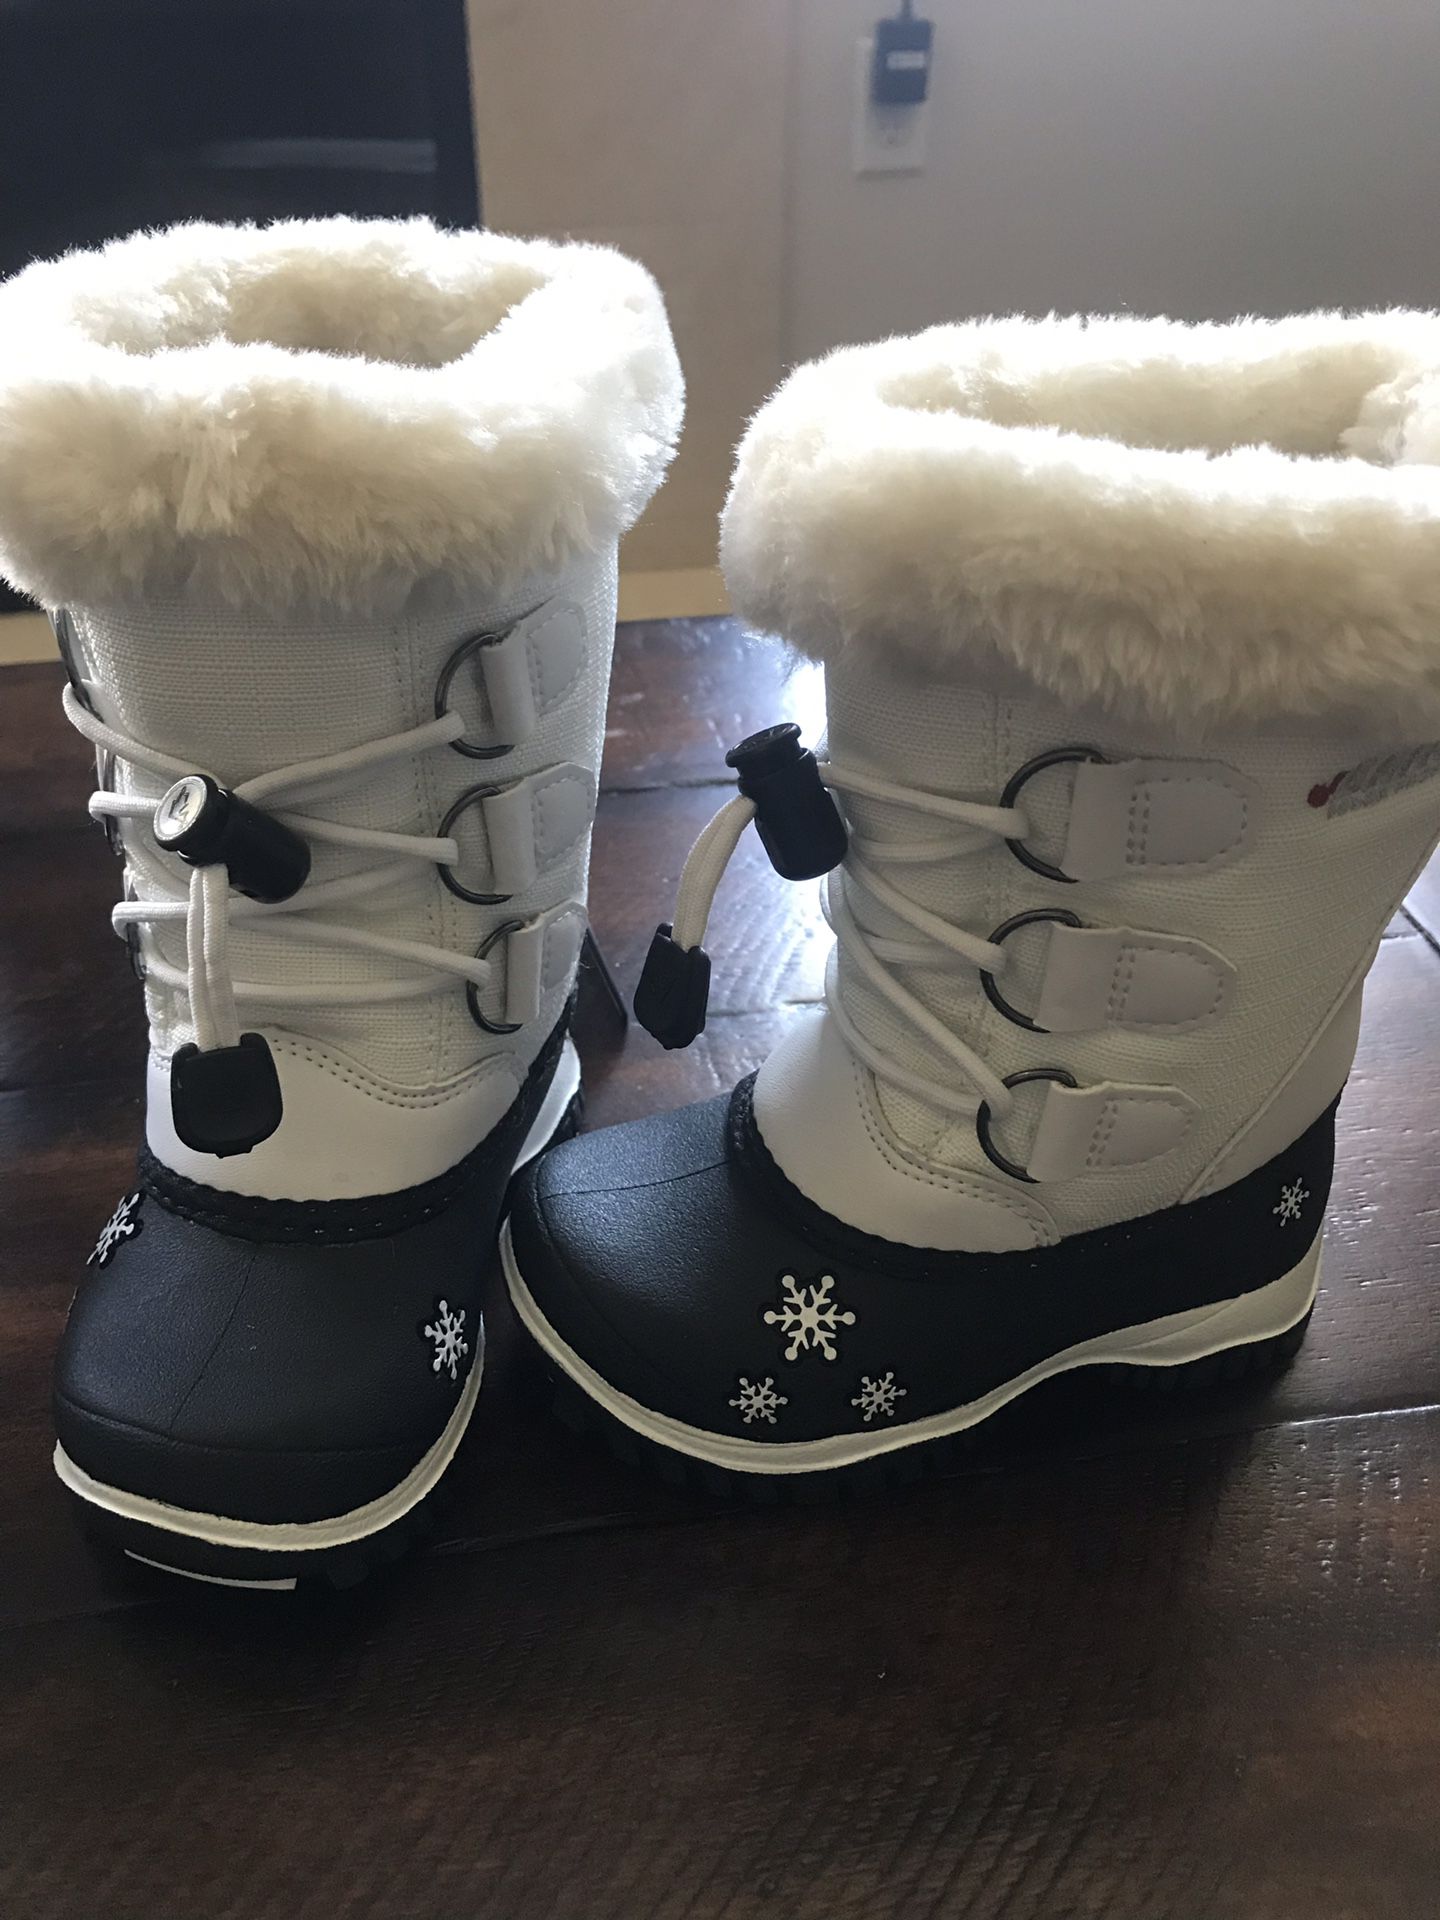 Toddler Size 5 Baffin Emma Snow Boots - Brand New in Box